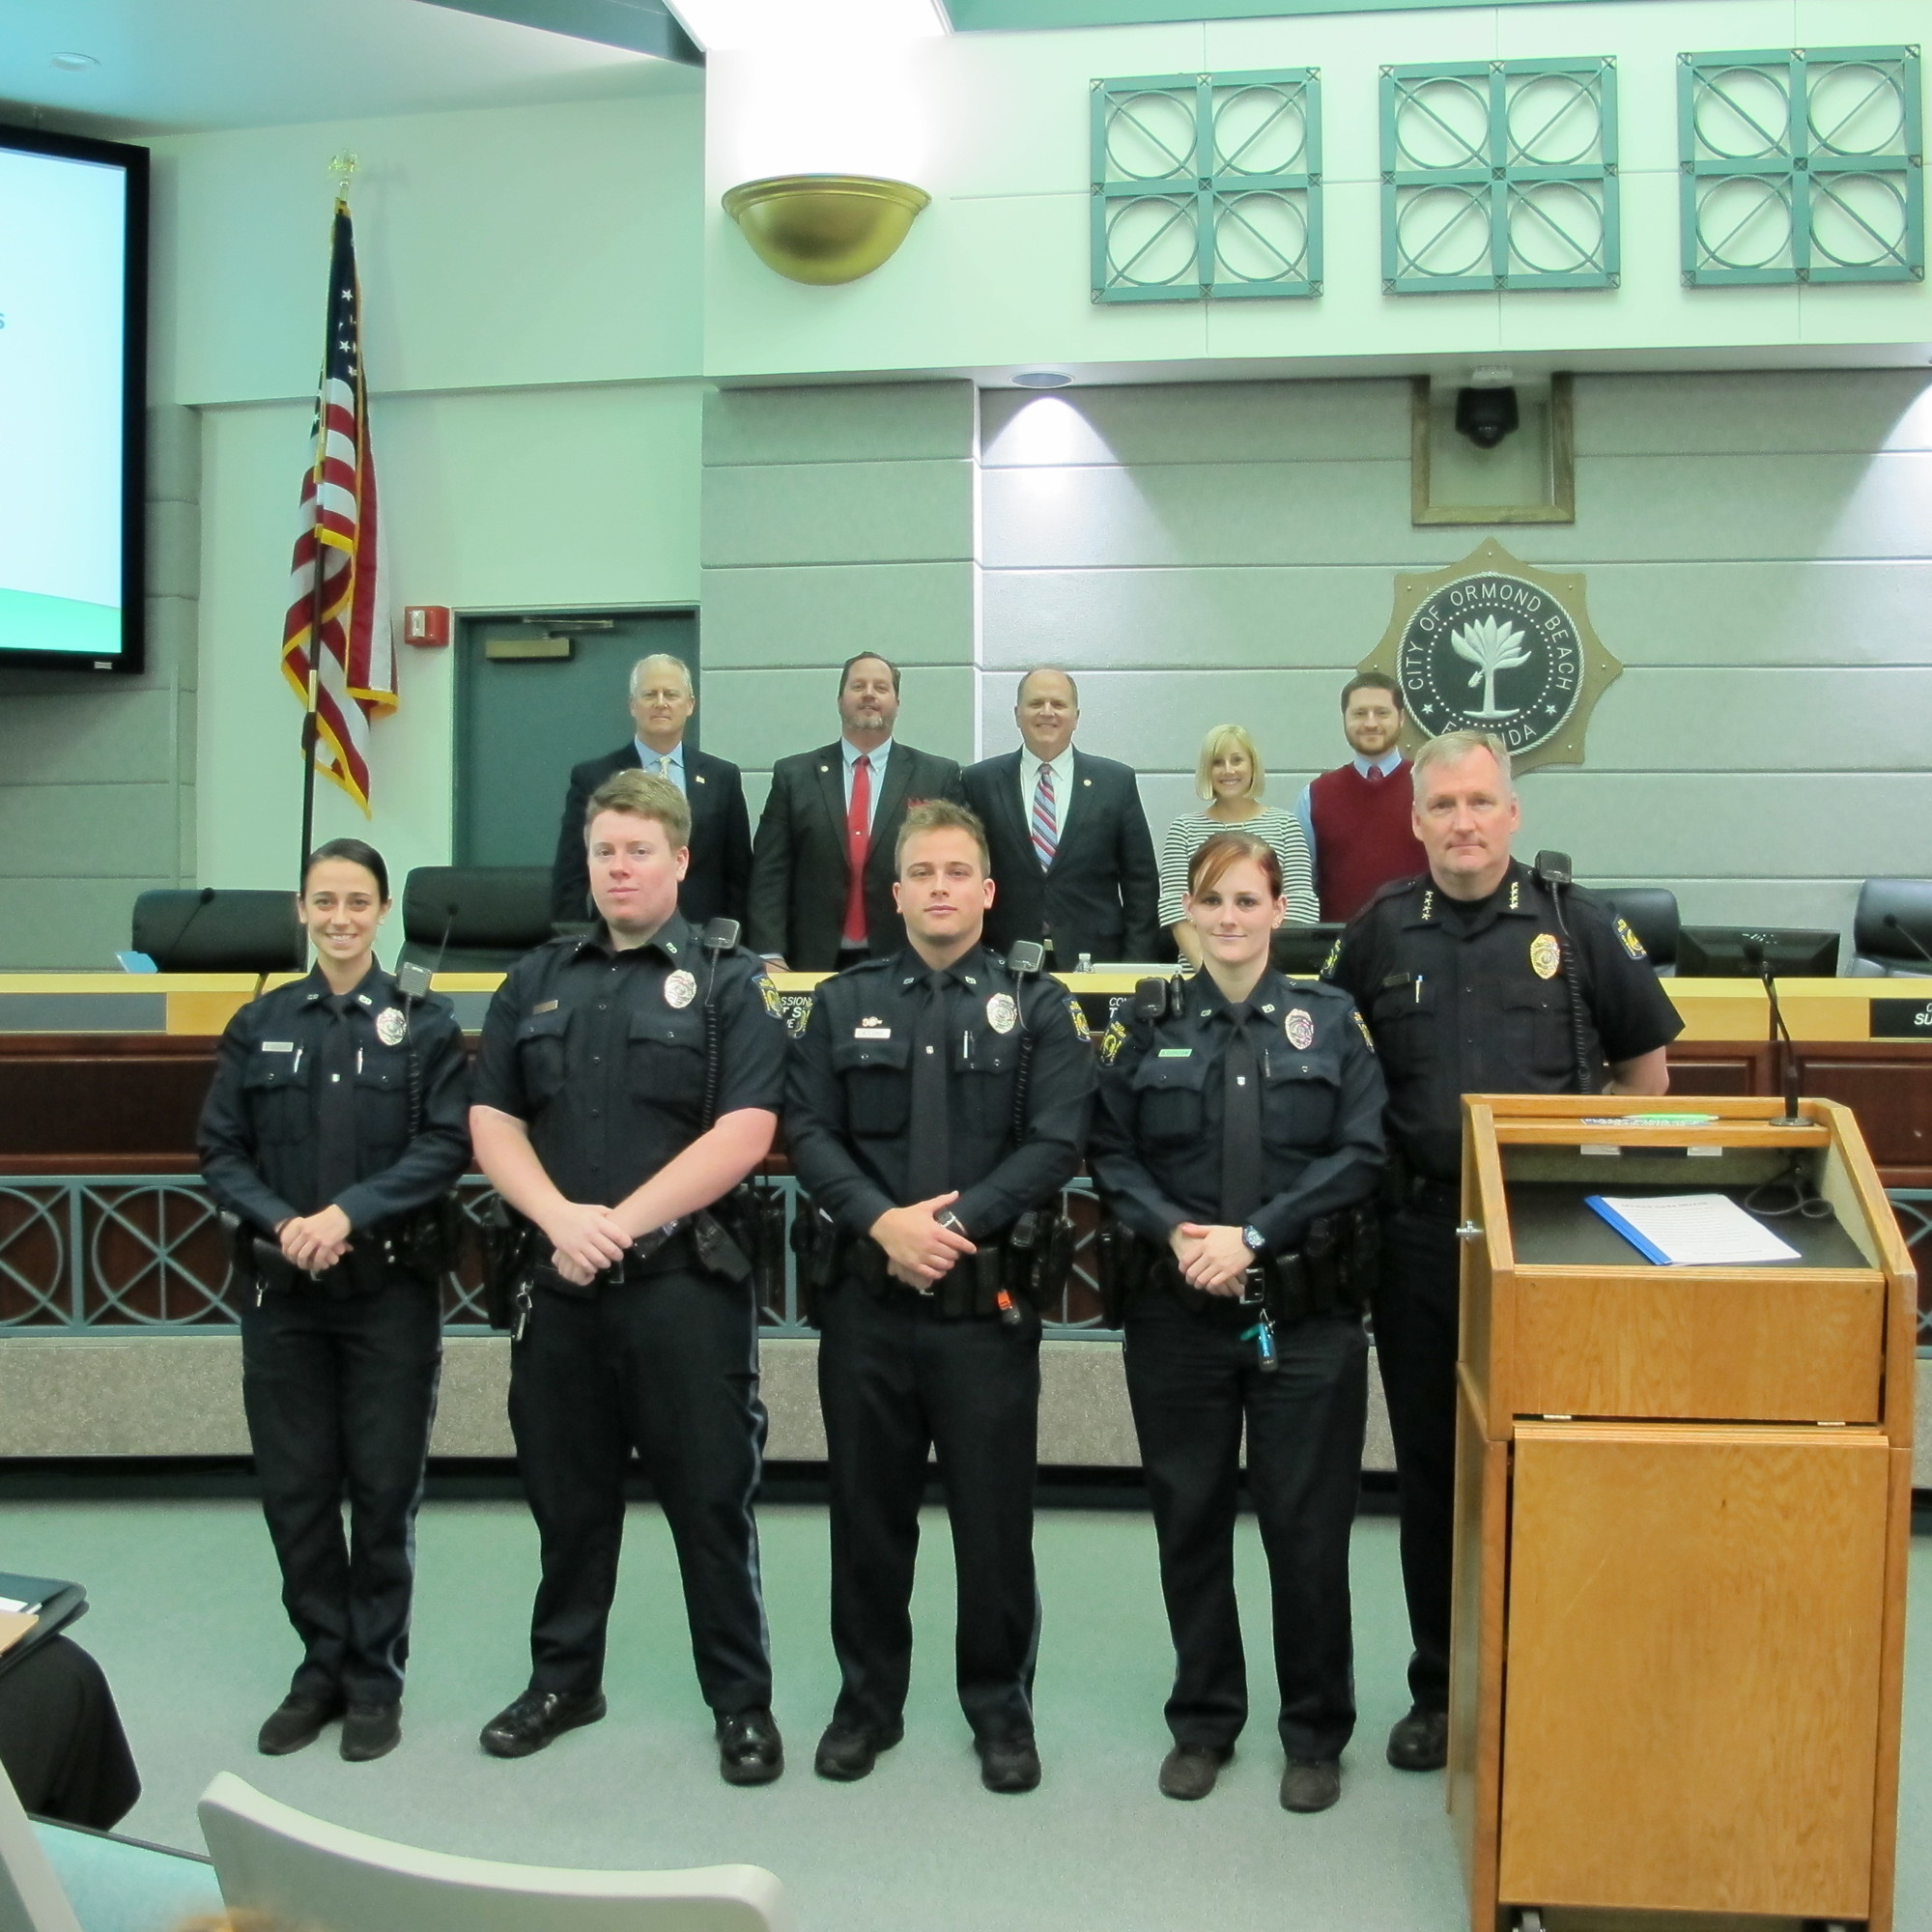 Police Chief Jesse Godfrey introduced Officer Ciara Devane, Officer Lloyd “Burt” Stanley, Officer Austin Long and Officer Sara Doroski to the City Commission. Courtesy photo